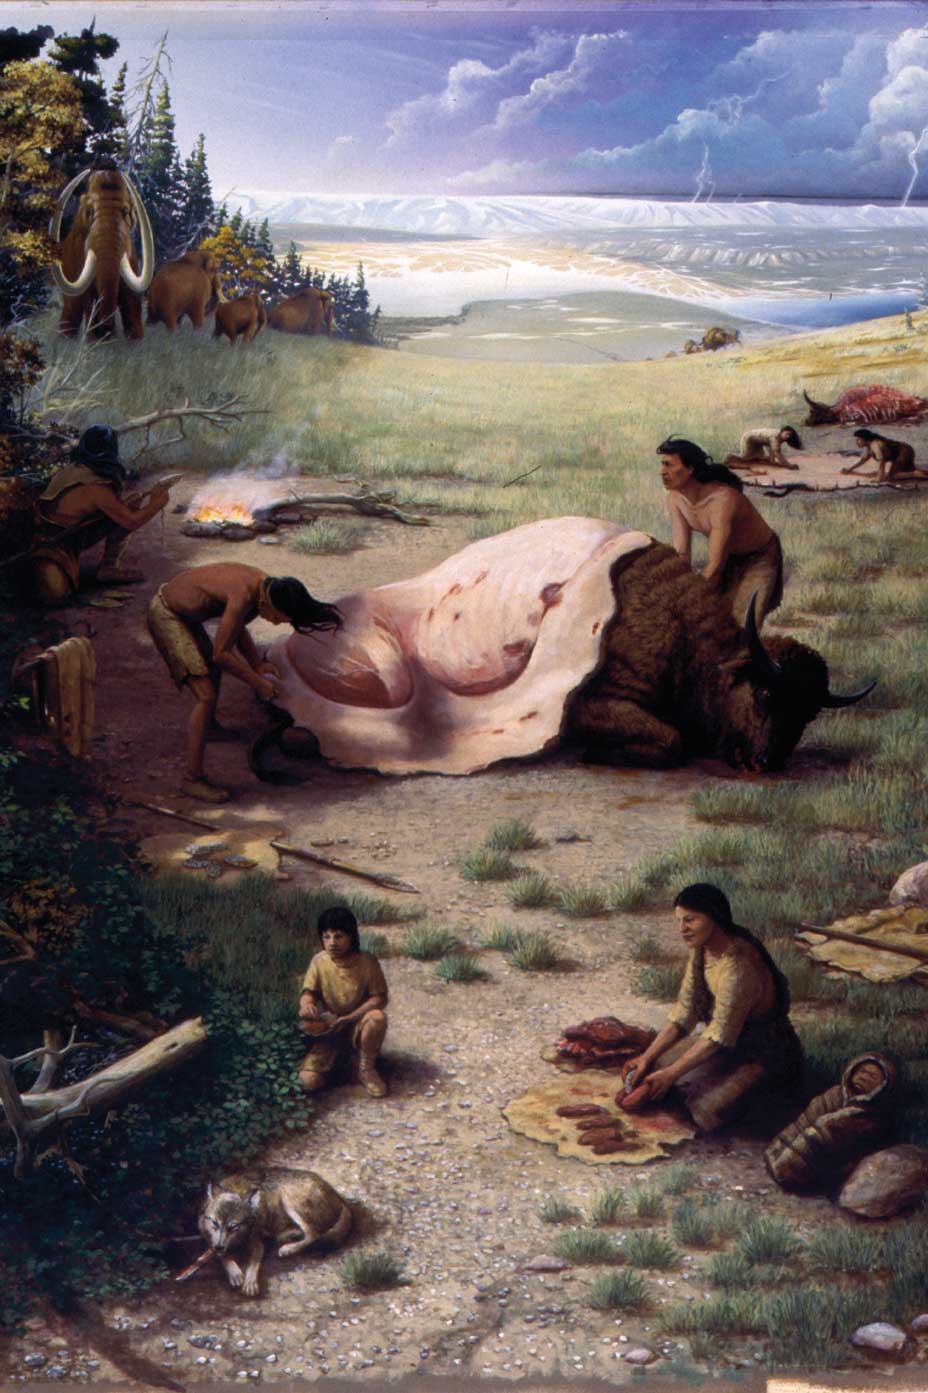 This painting shows Paleo-Indians